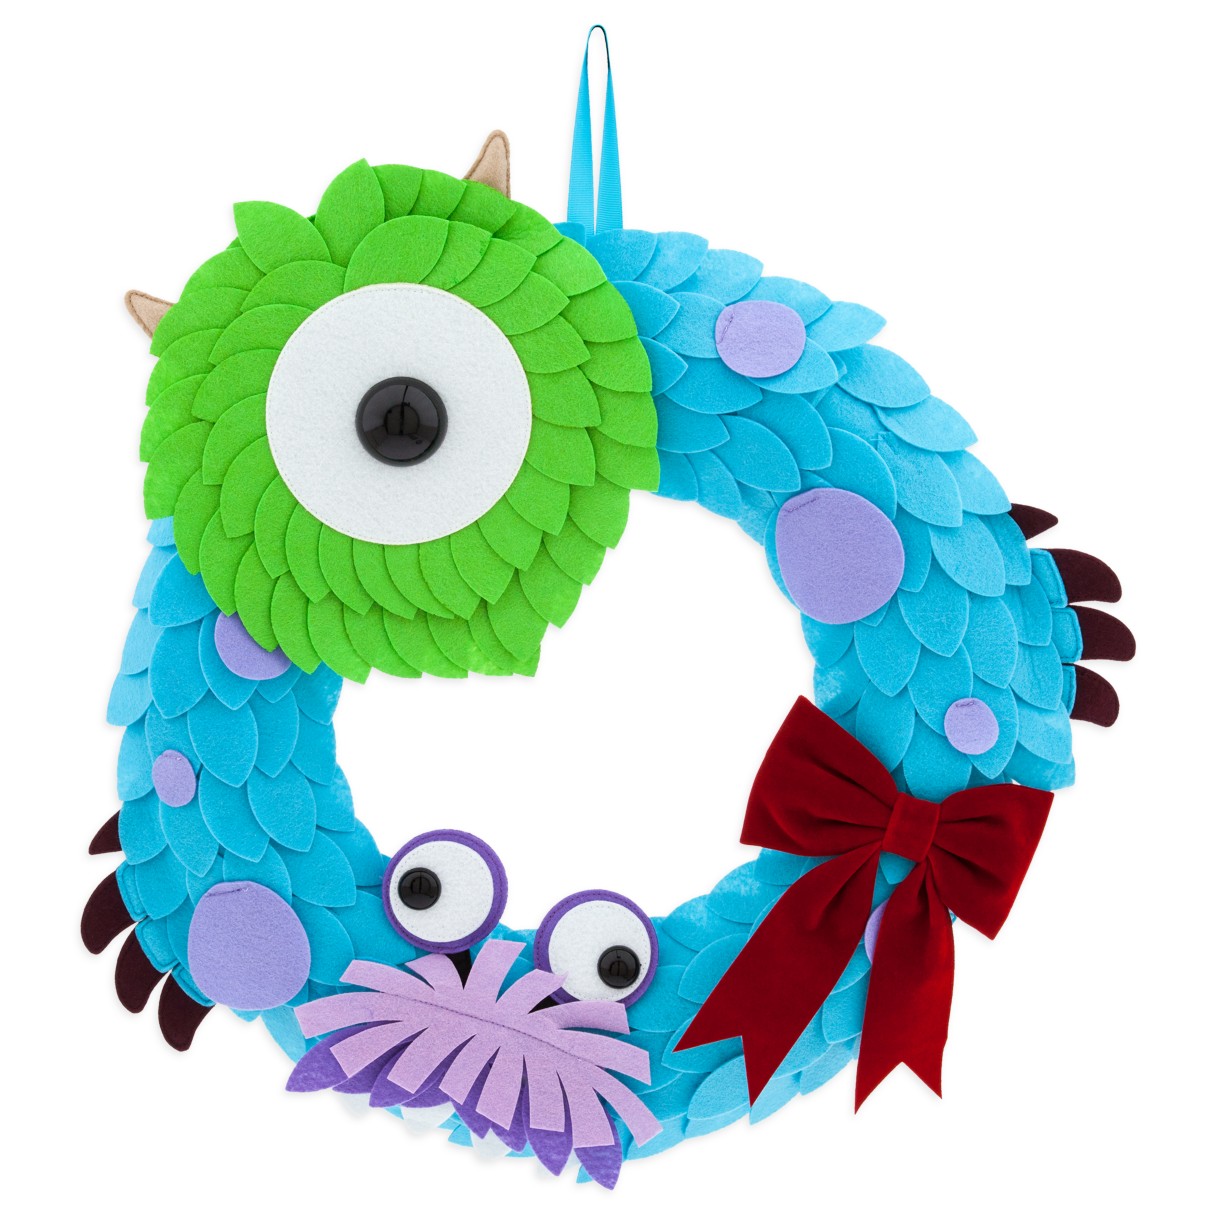 Monsters, Inc. Holiday Wreath